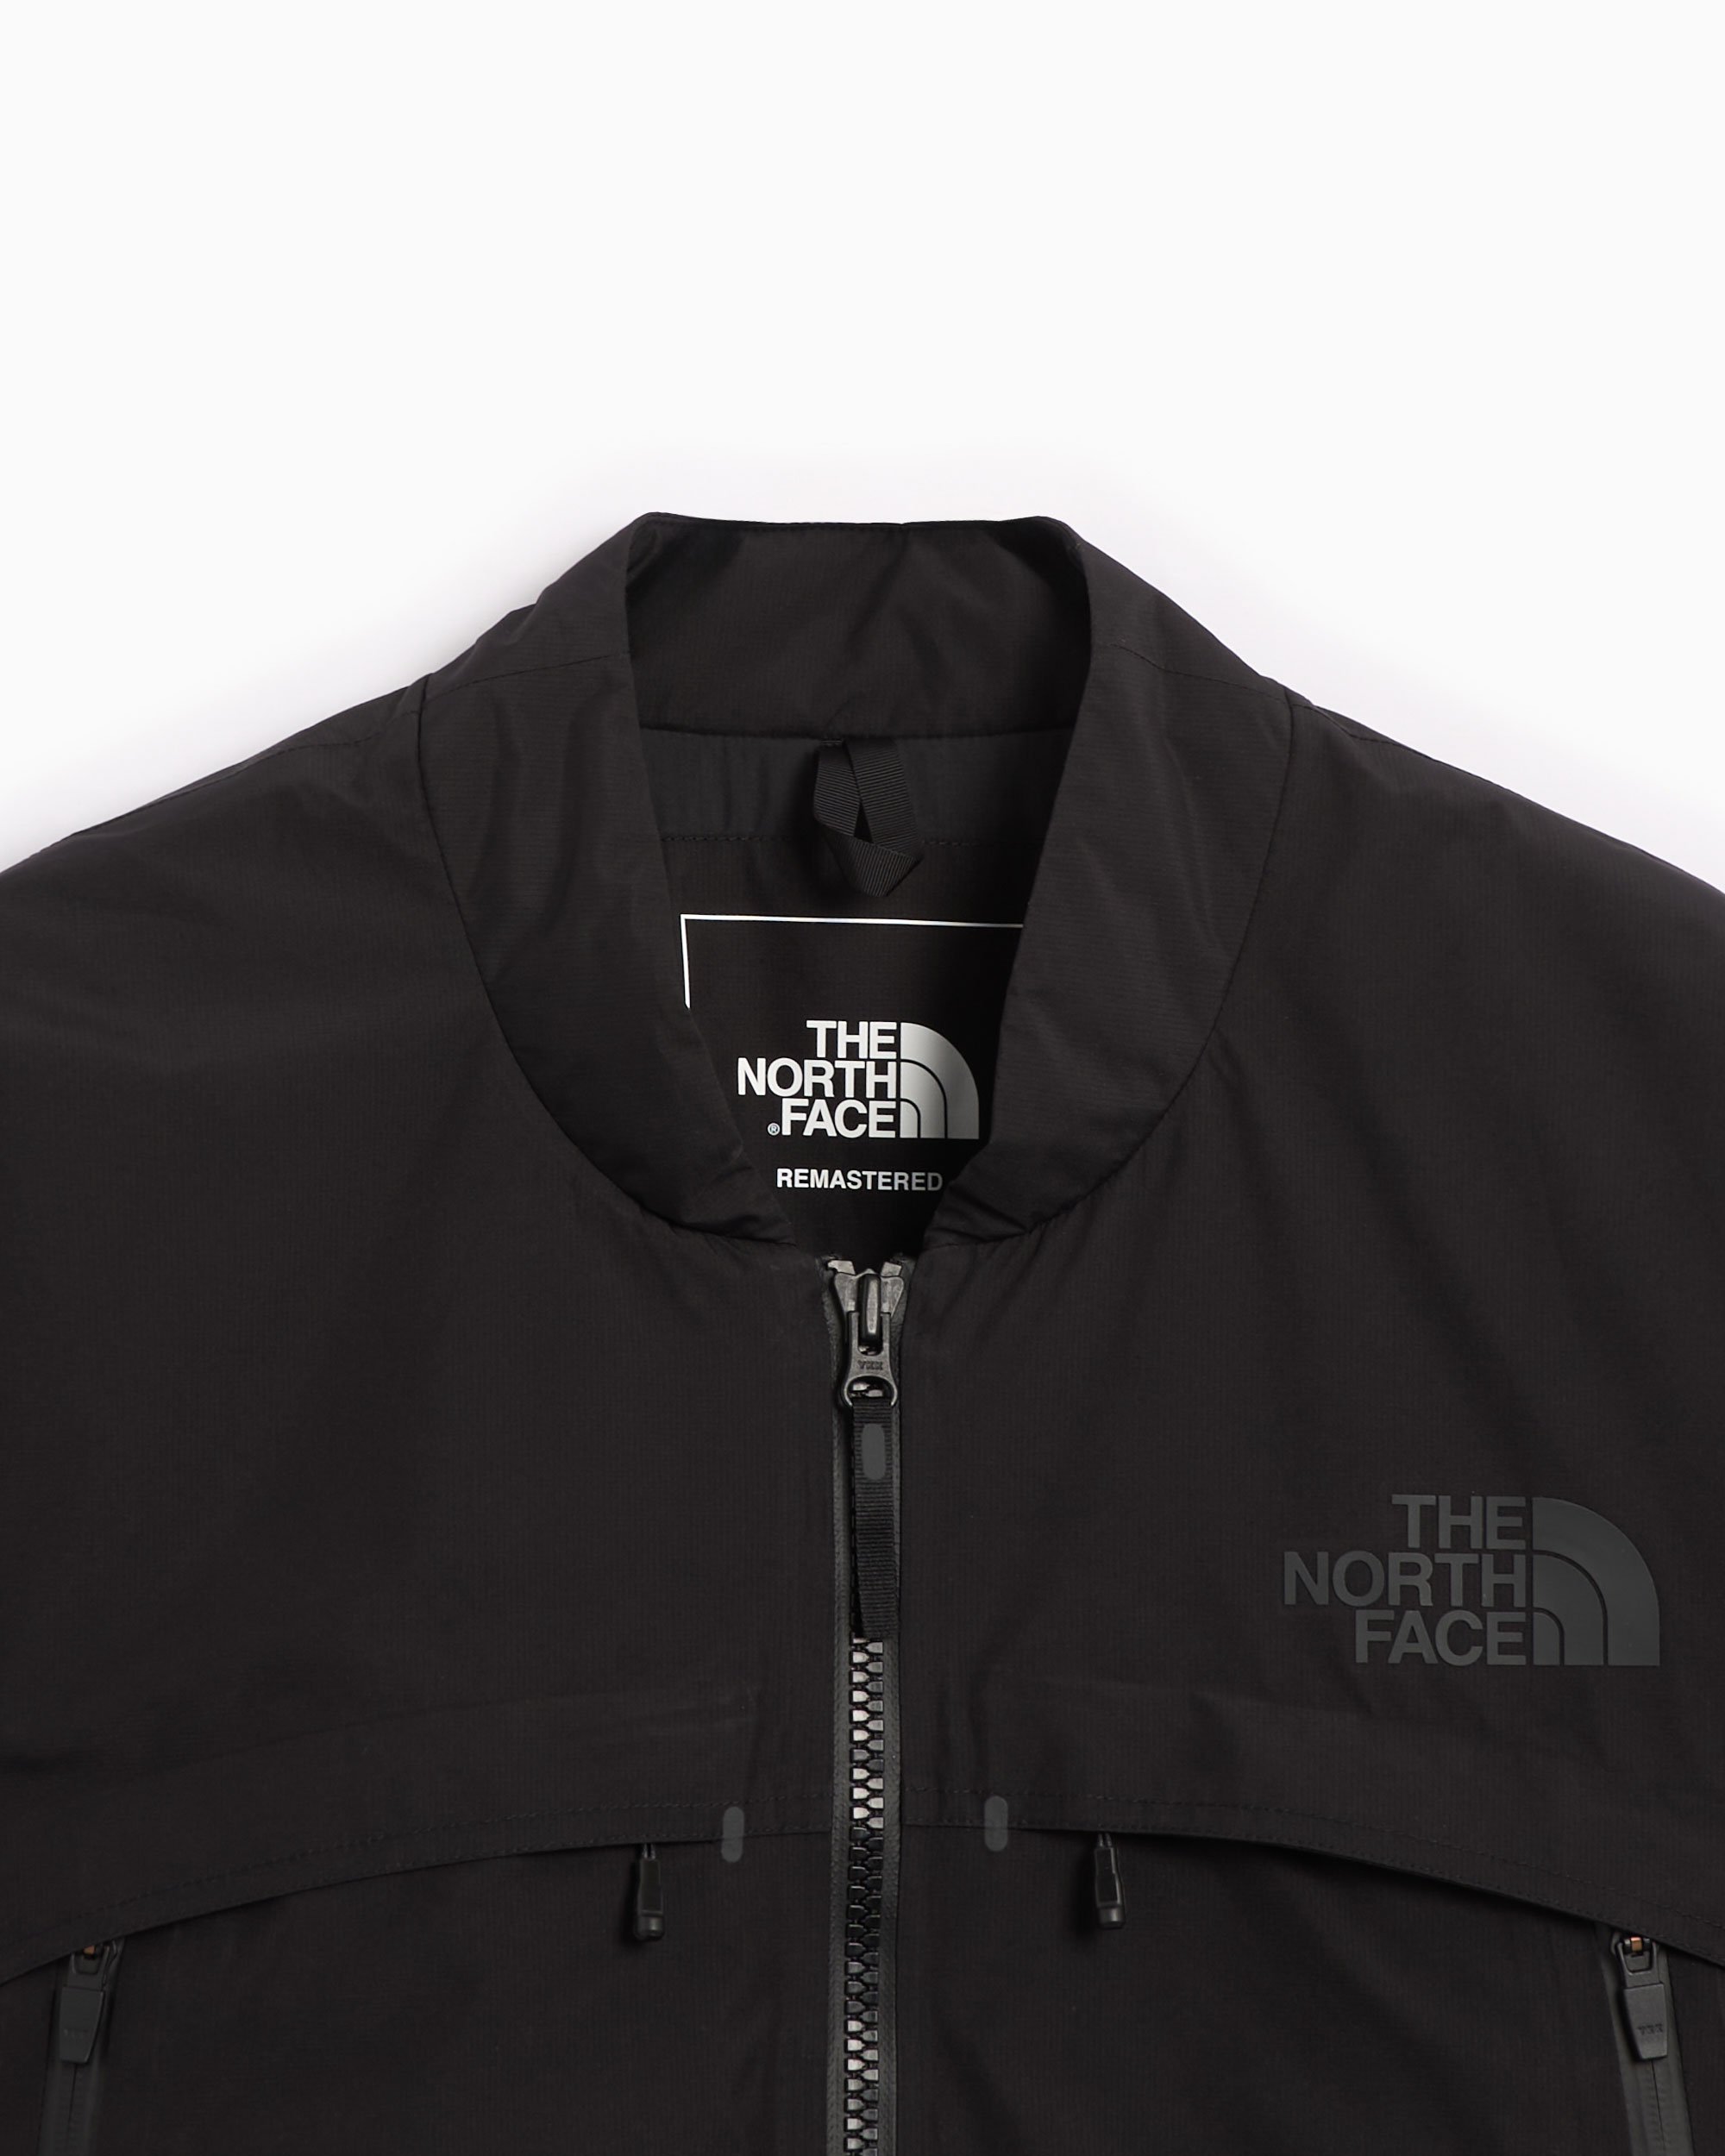 The North Face: Black RMST Steep Tech Bomb Shell Jacket